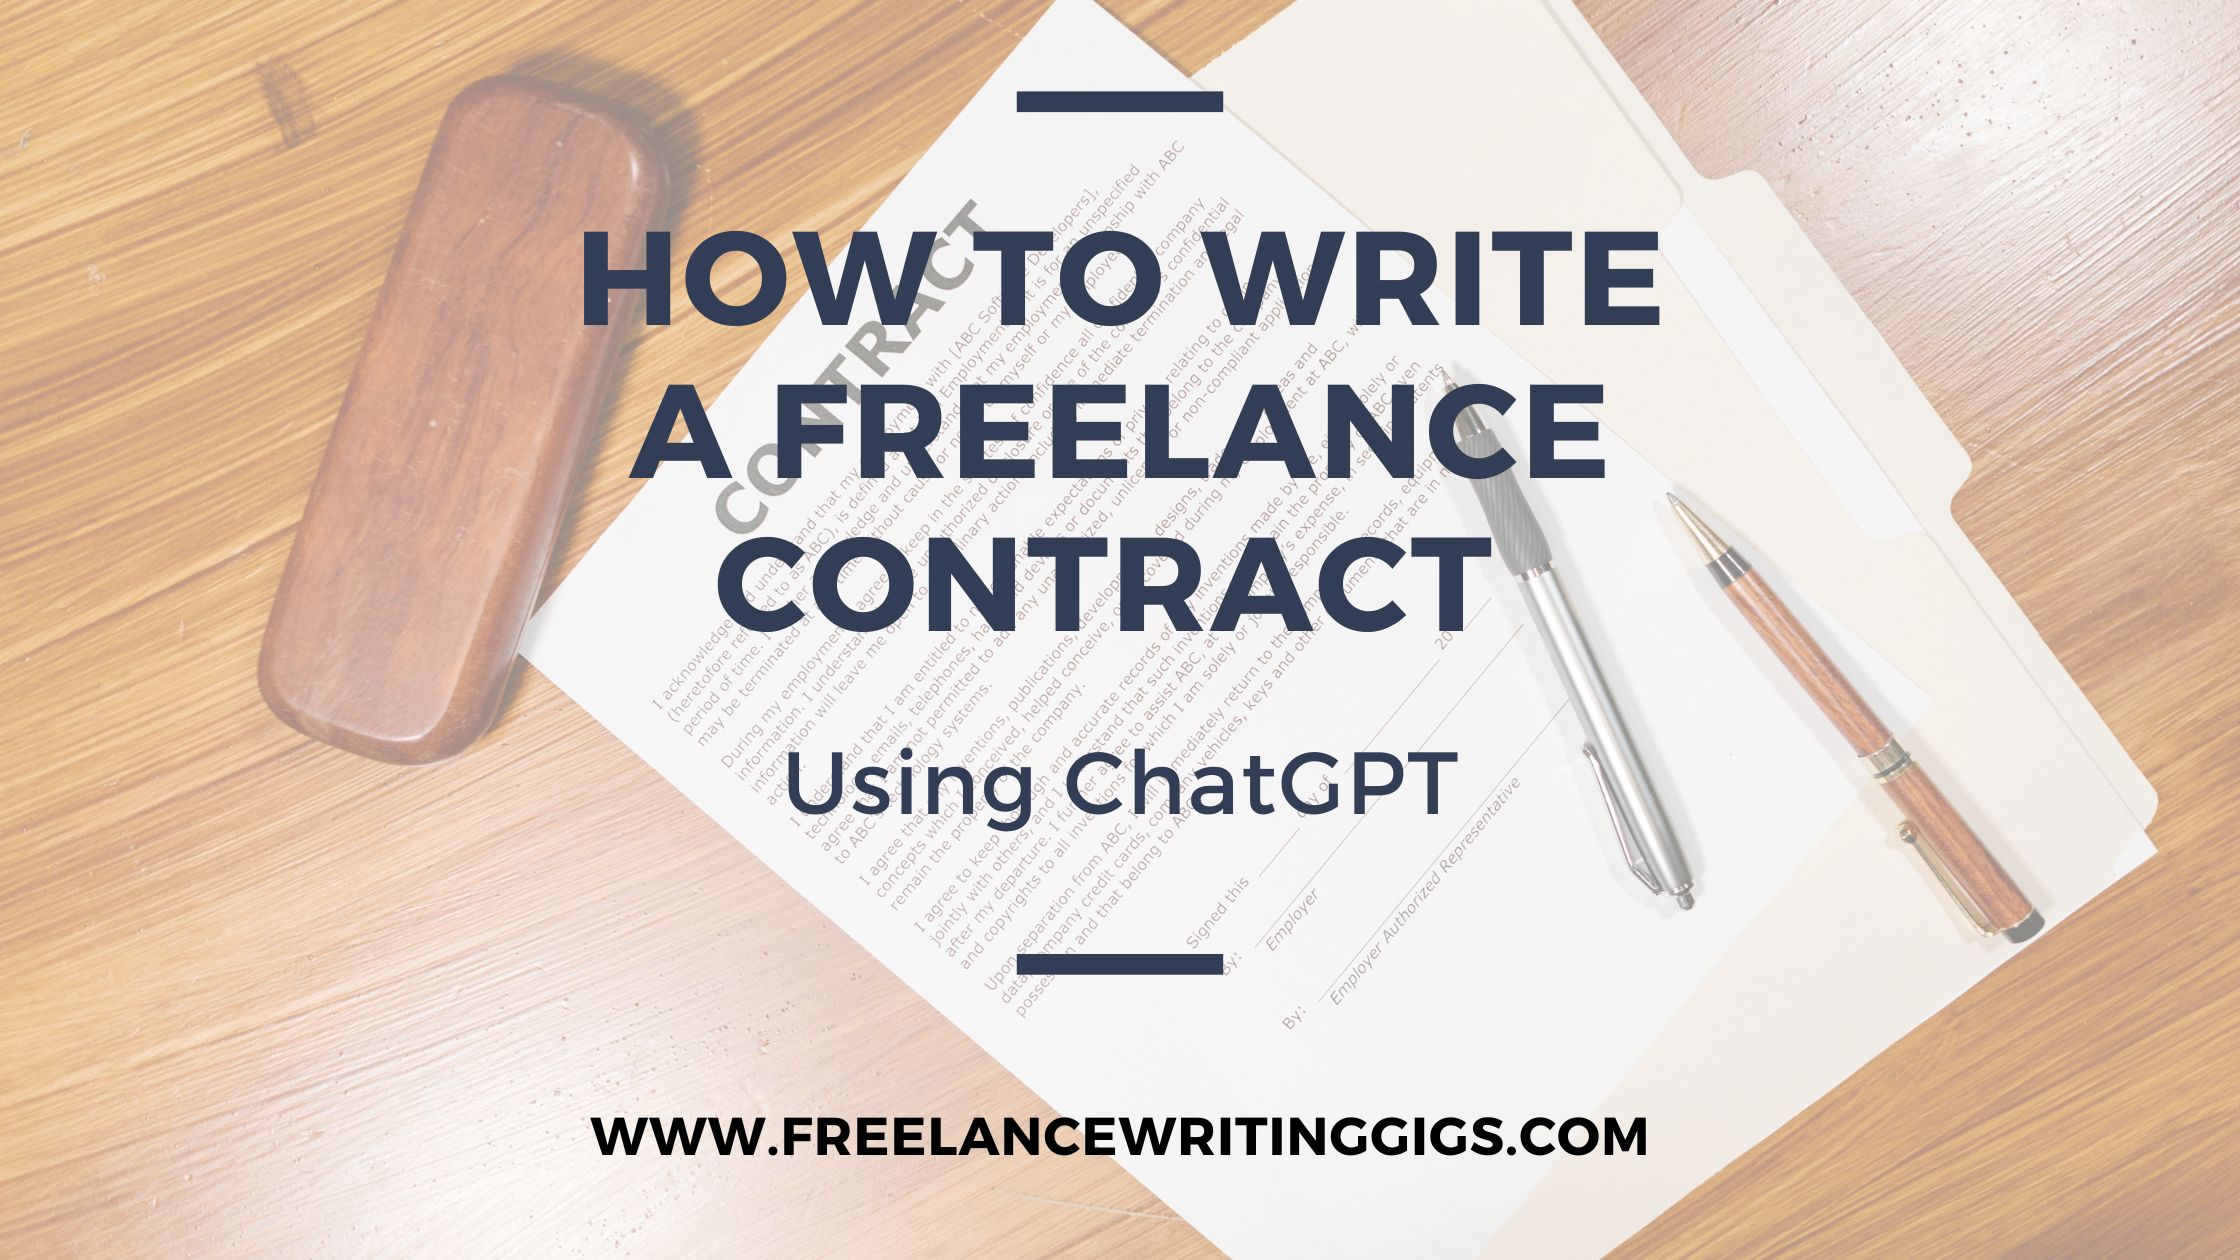 How to Write a Freelance Contract Using ChatGPT